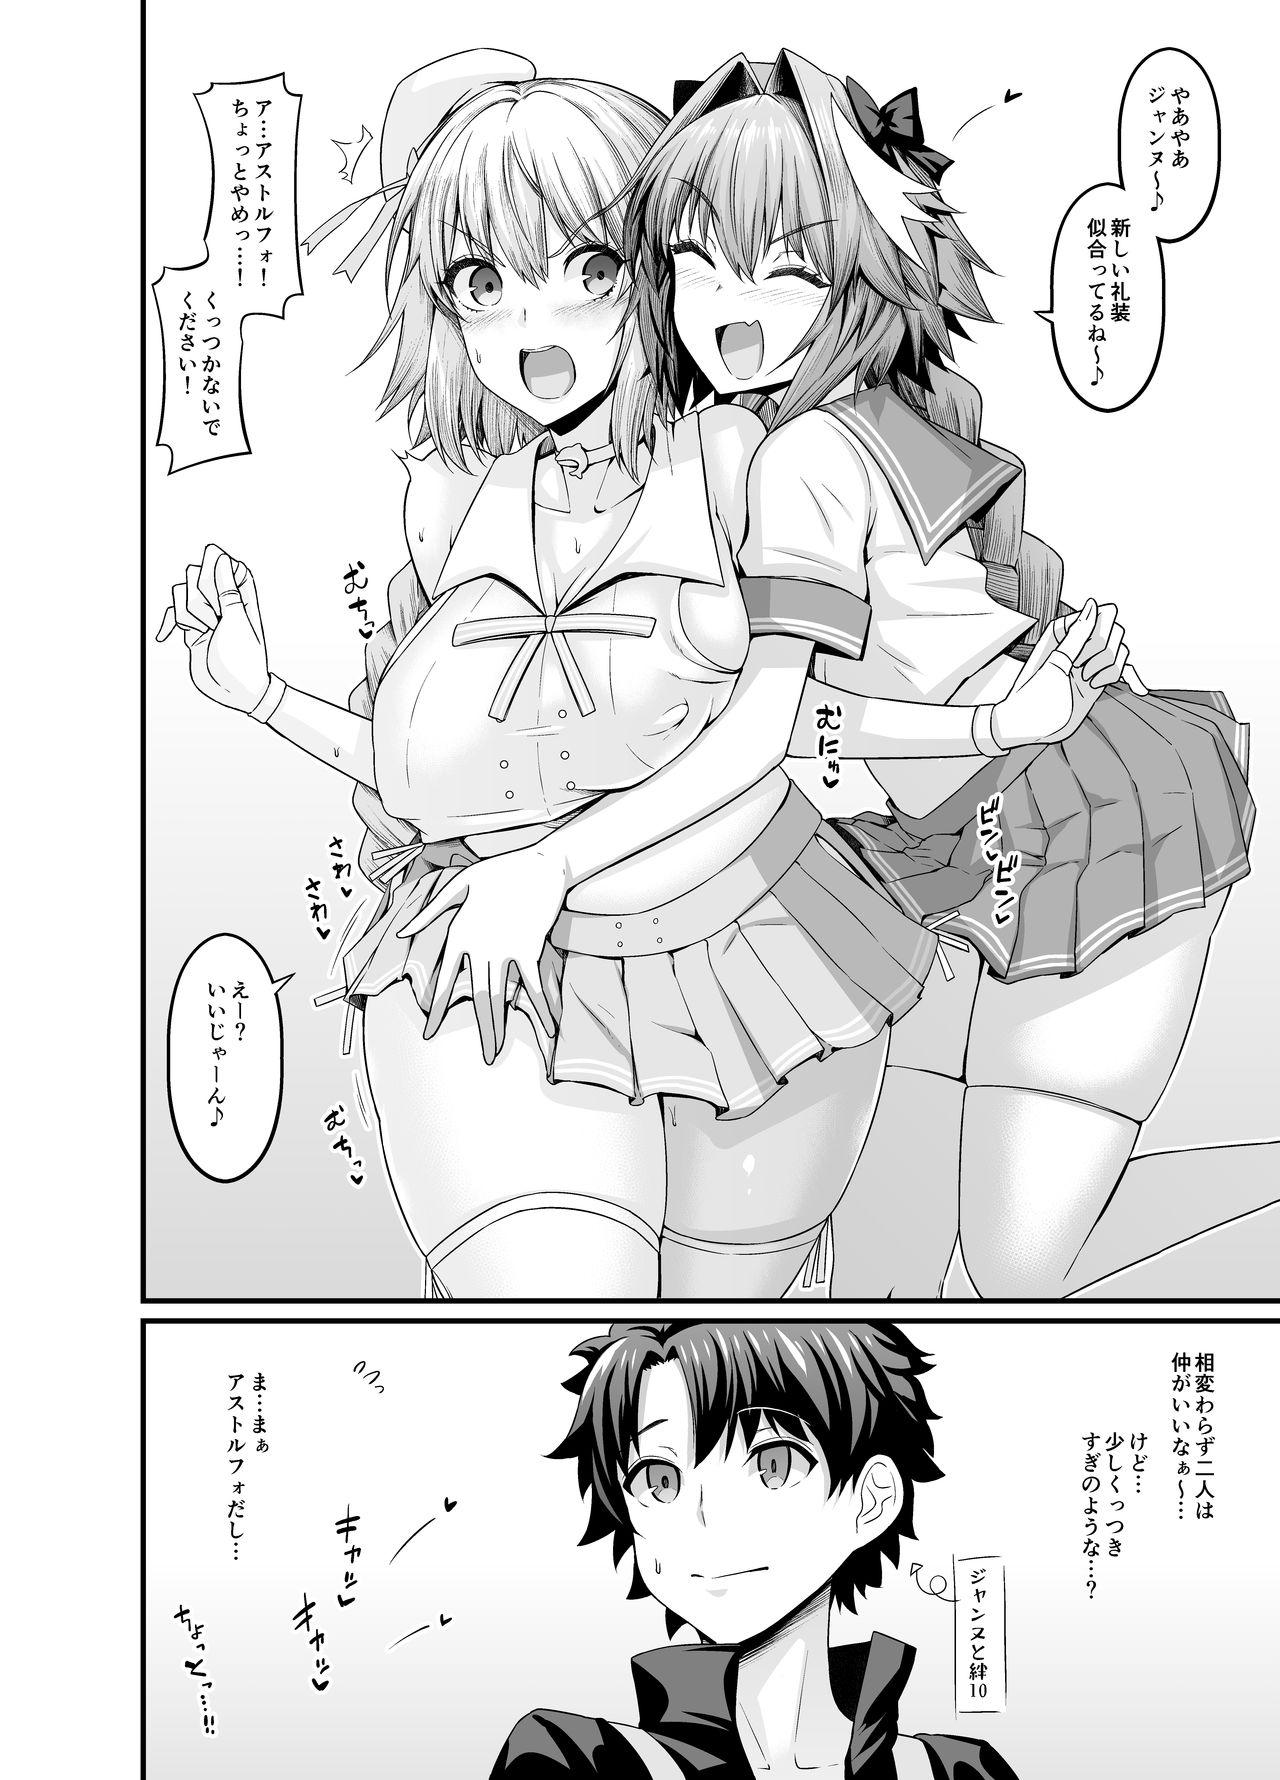 Astolfo Makes Friends with Jeanne 2